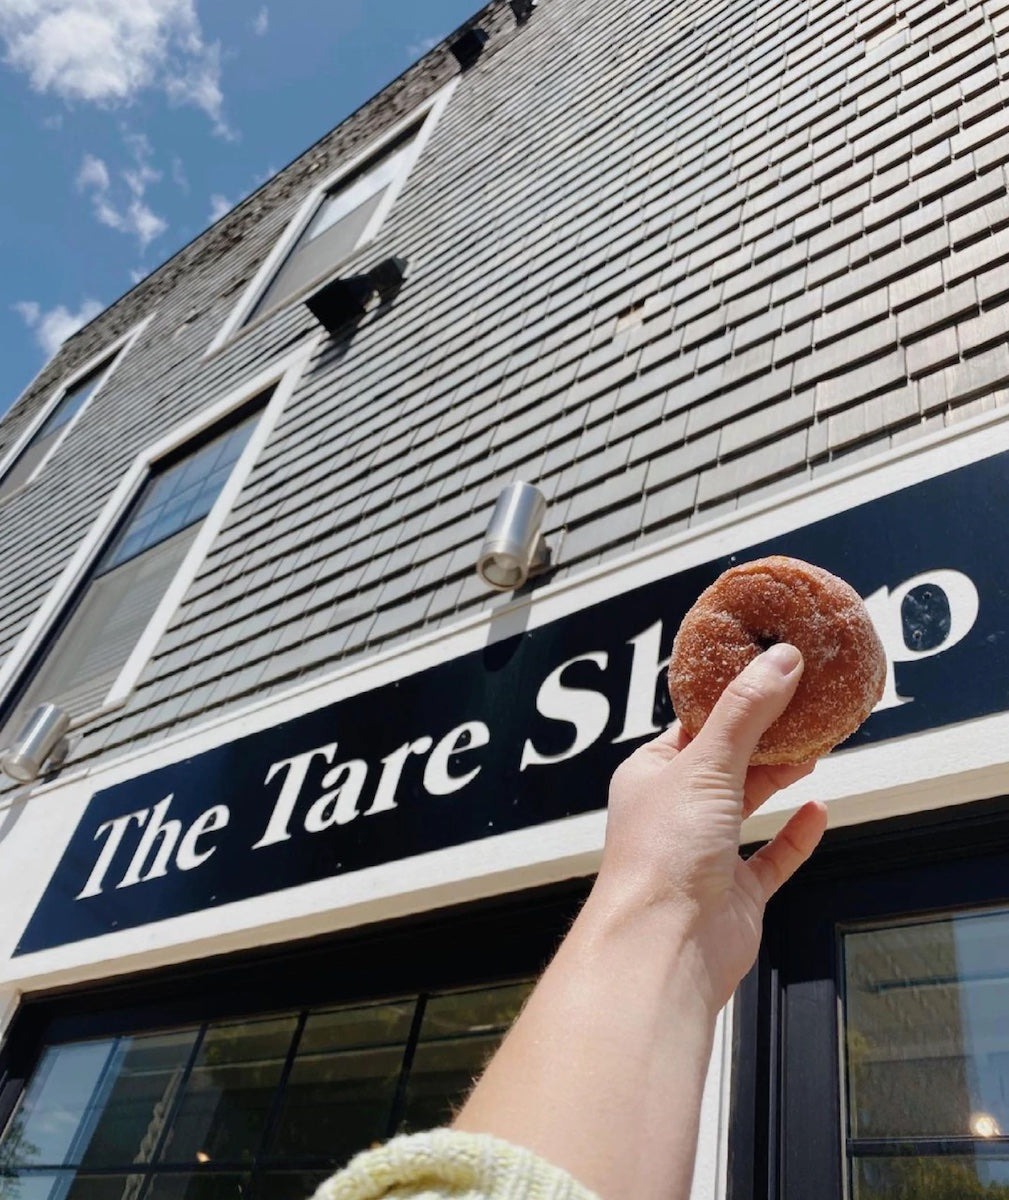 A hand holds up a donut over the "o" of "The Tare Shop" sign on a sunny day